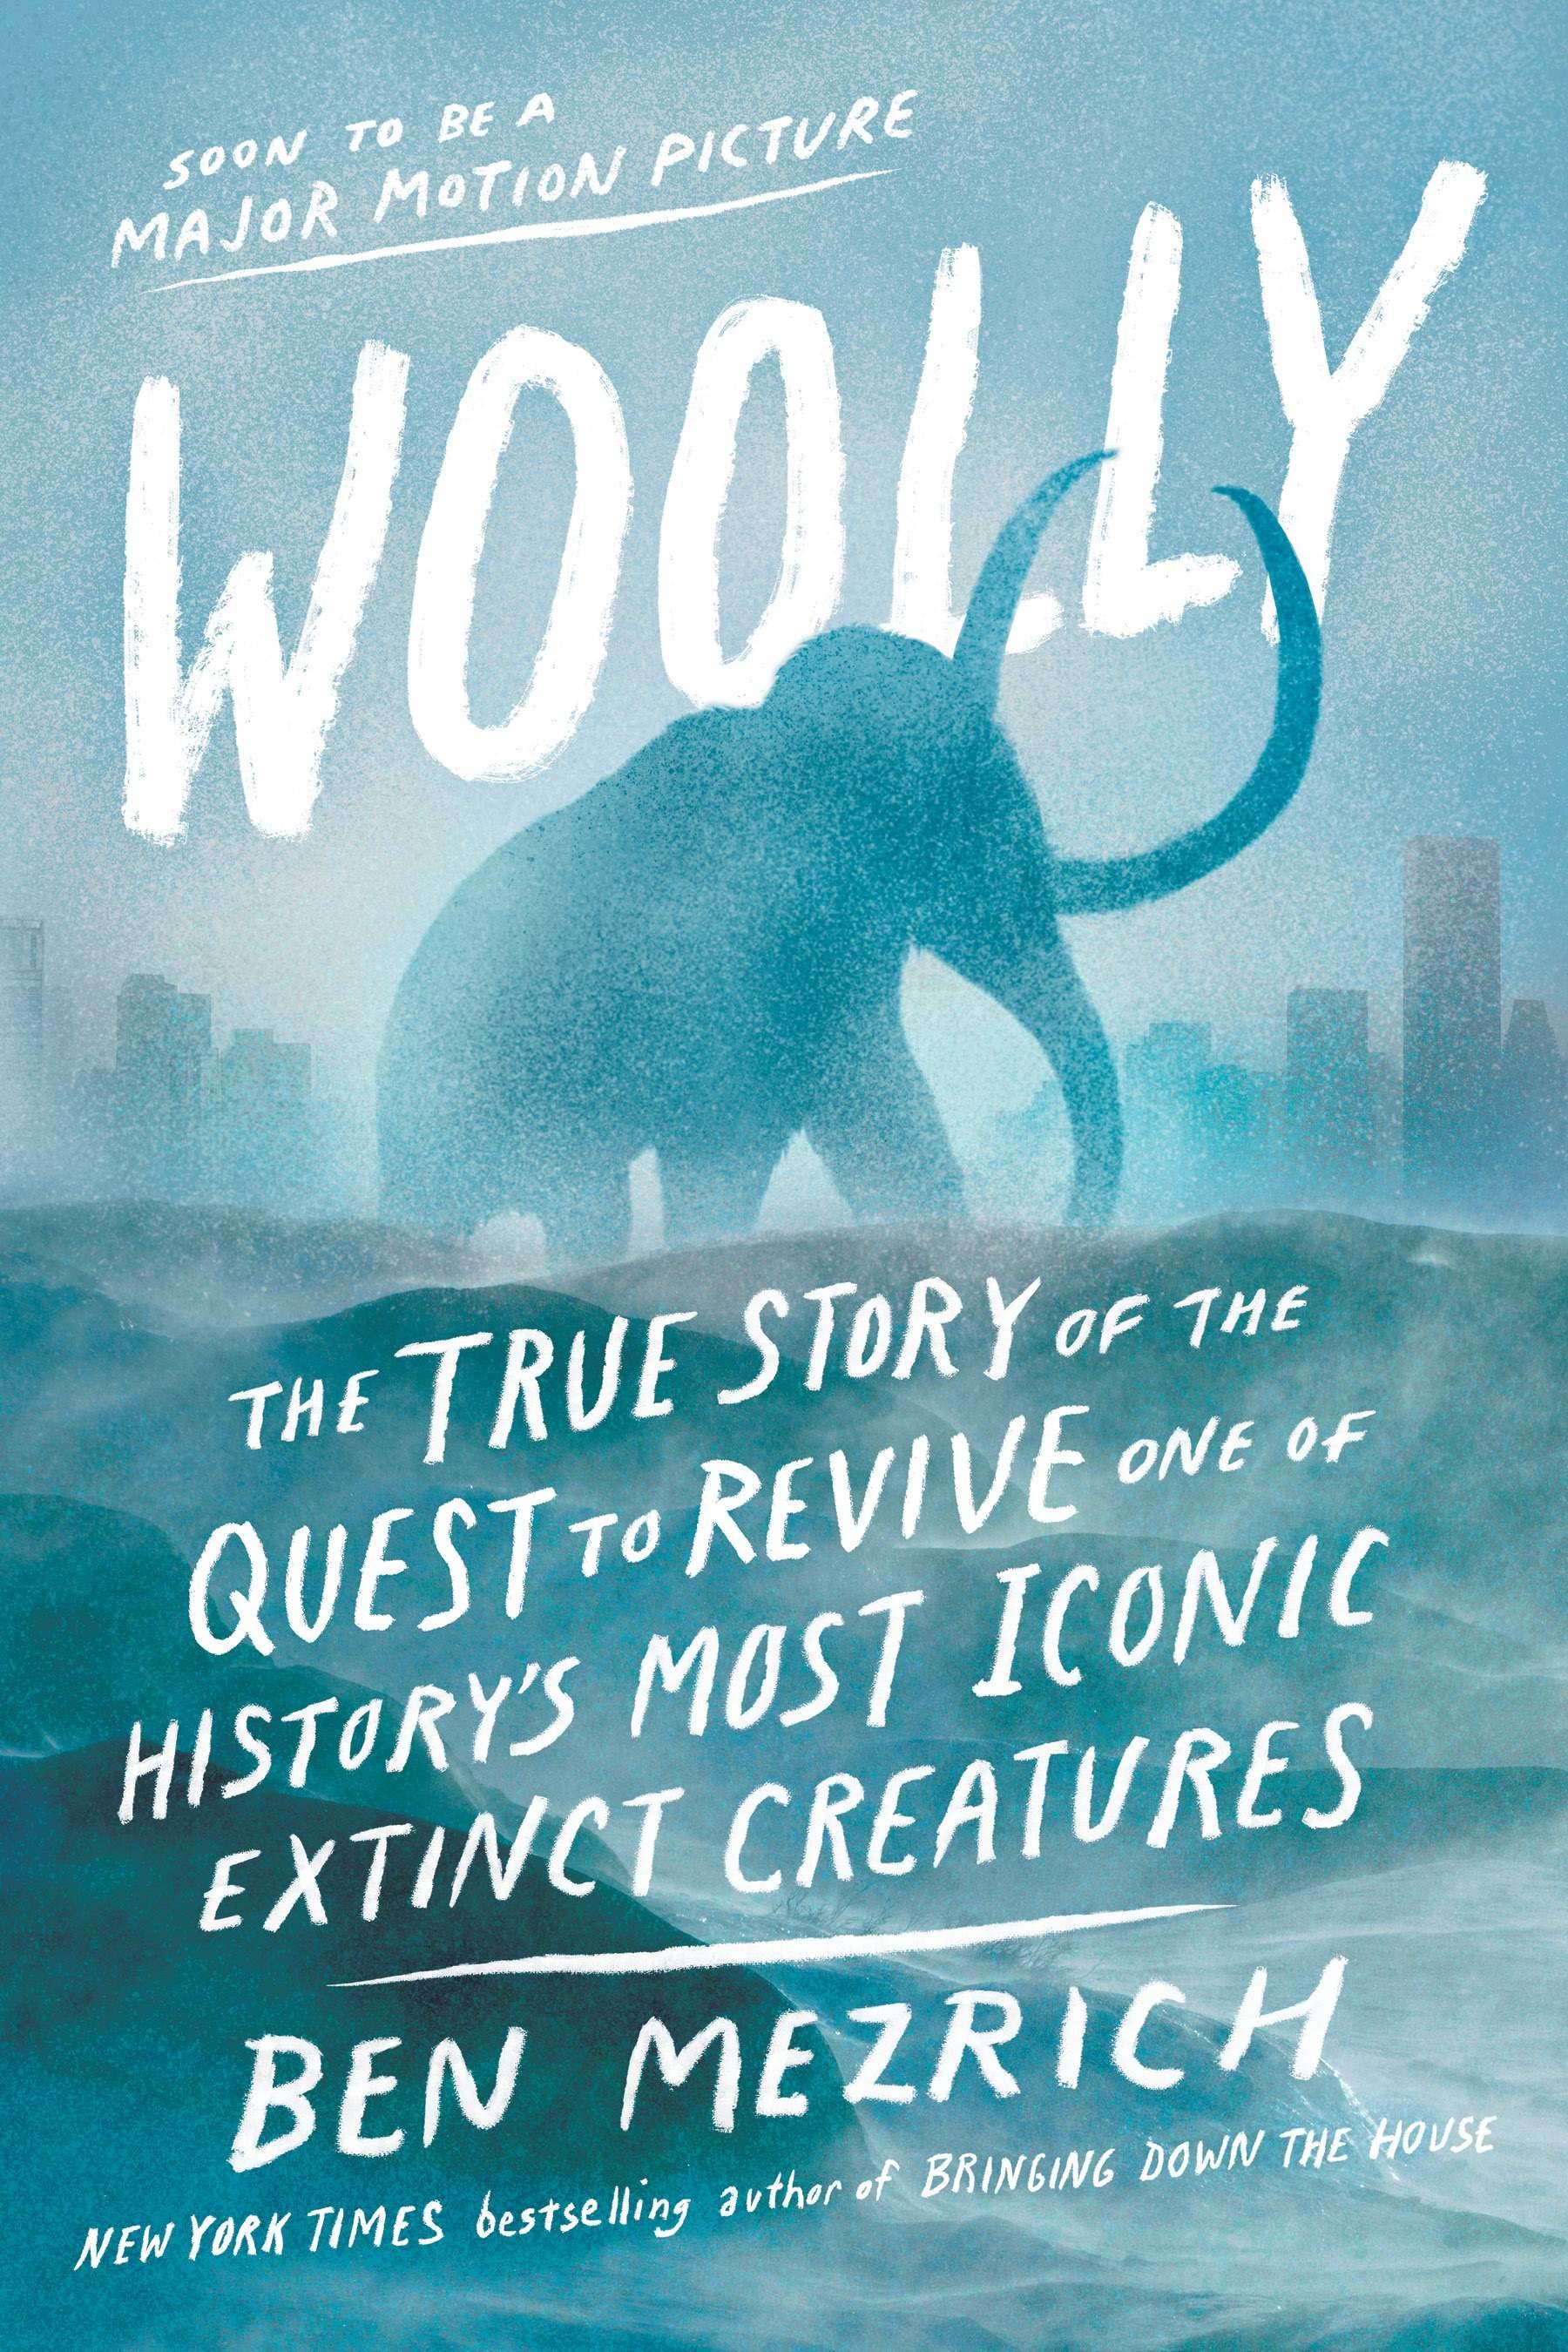 The Bookworm Sez: ‘Woolly’ a mammoth-sized read